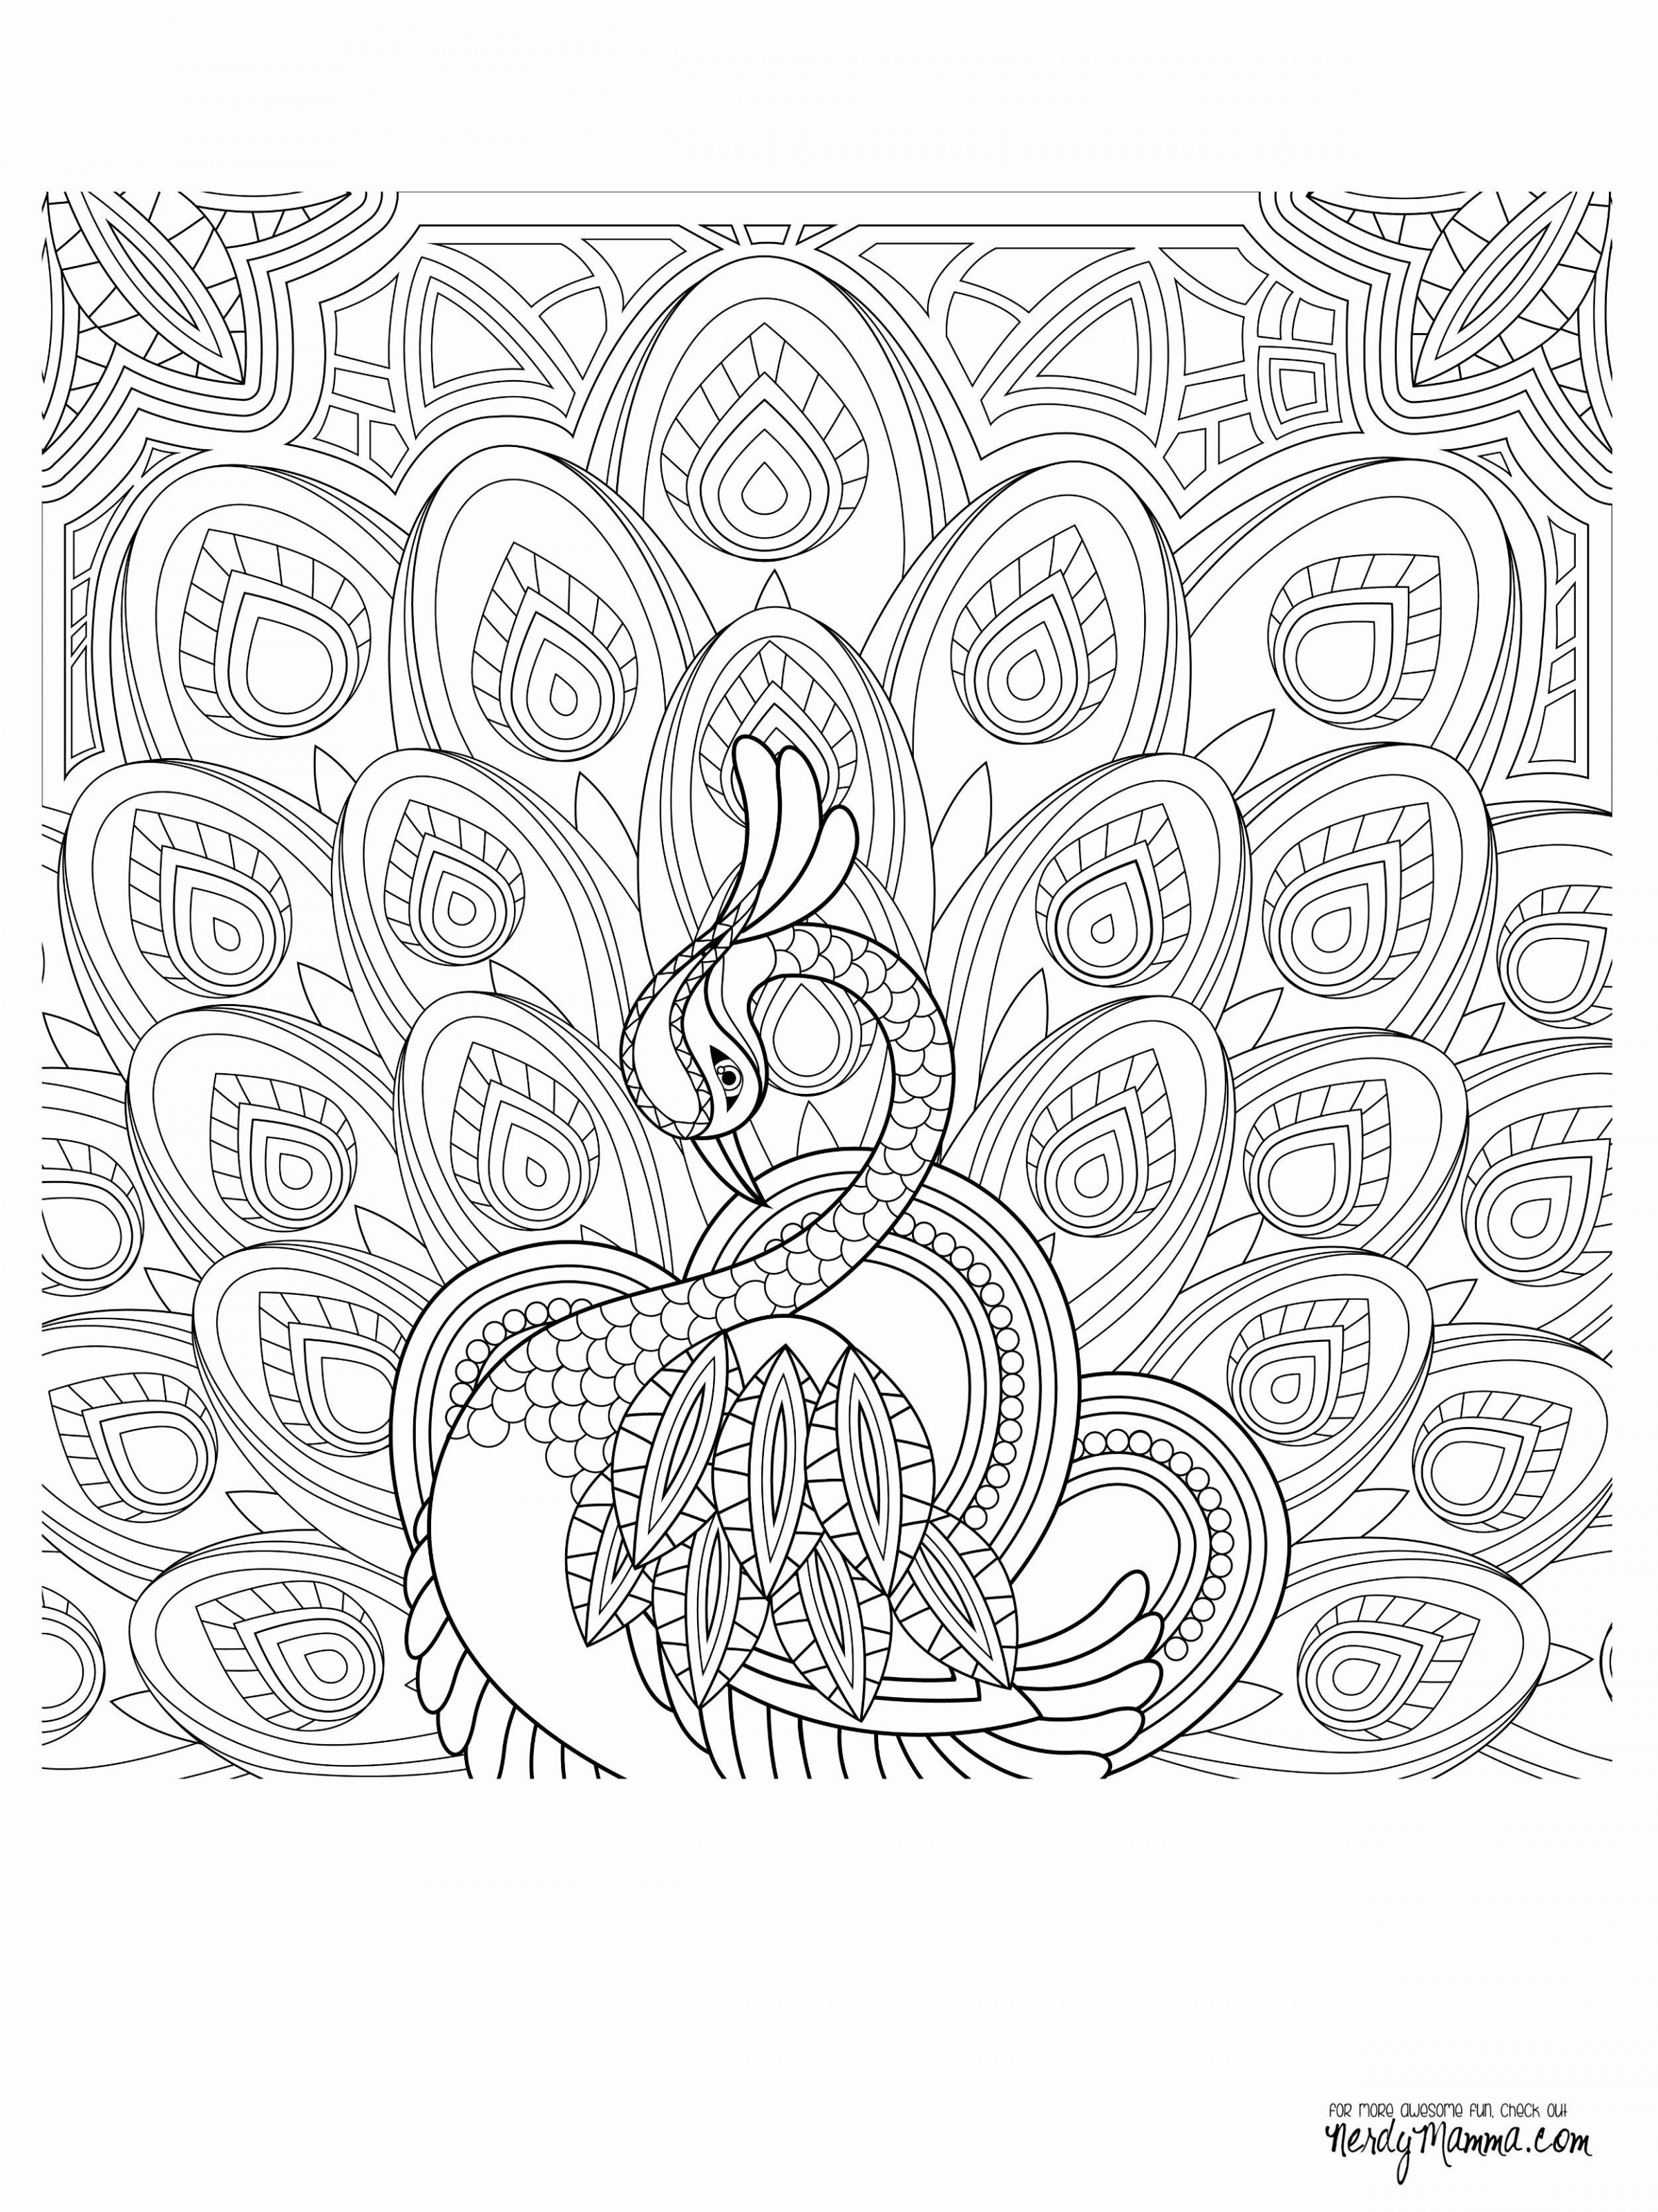 Coloring Pages For Adults Easter Easter Coloring Pages Printable Free Printable Coloring Pages For